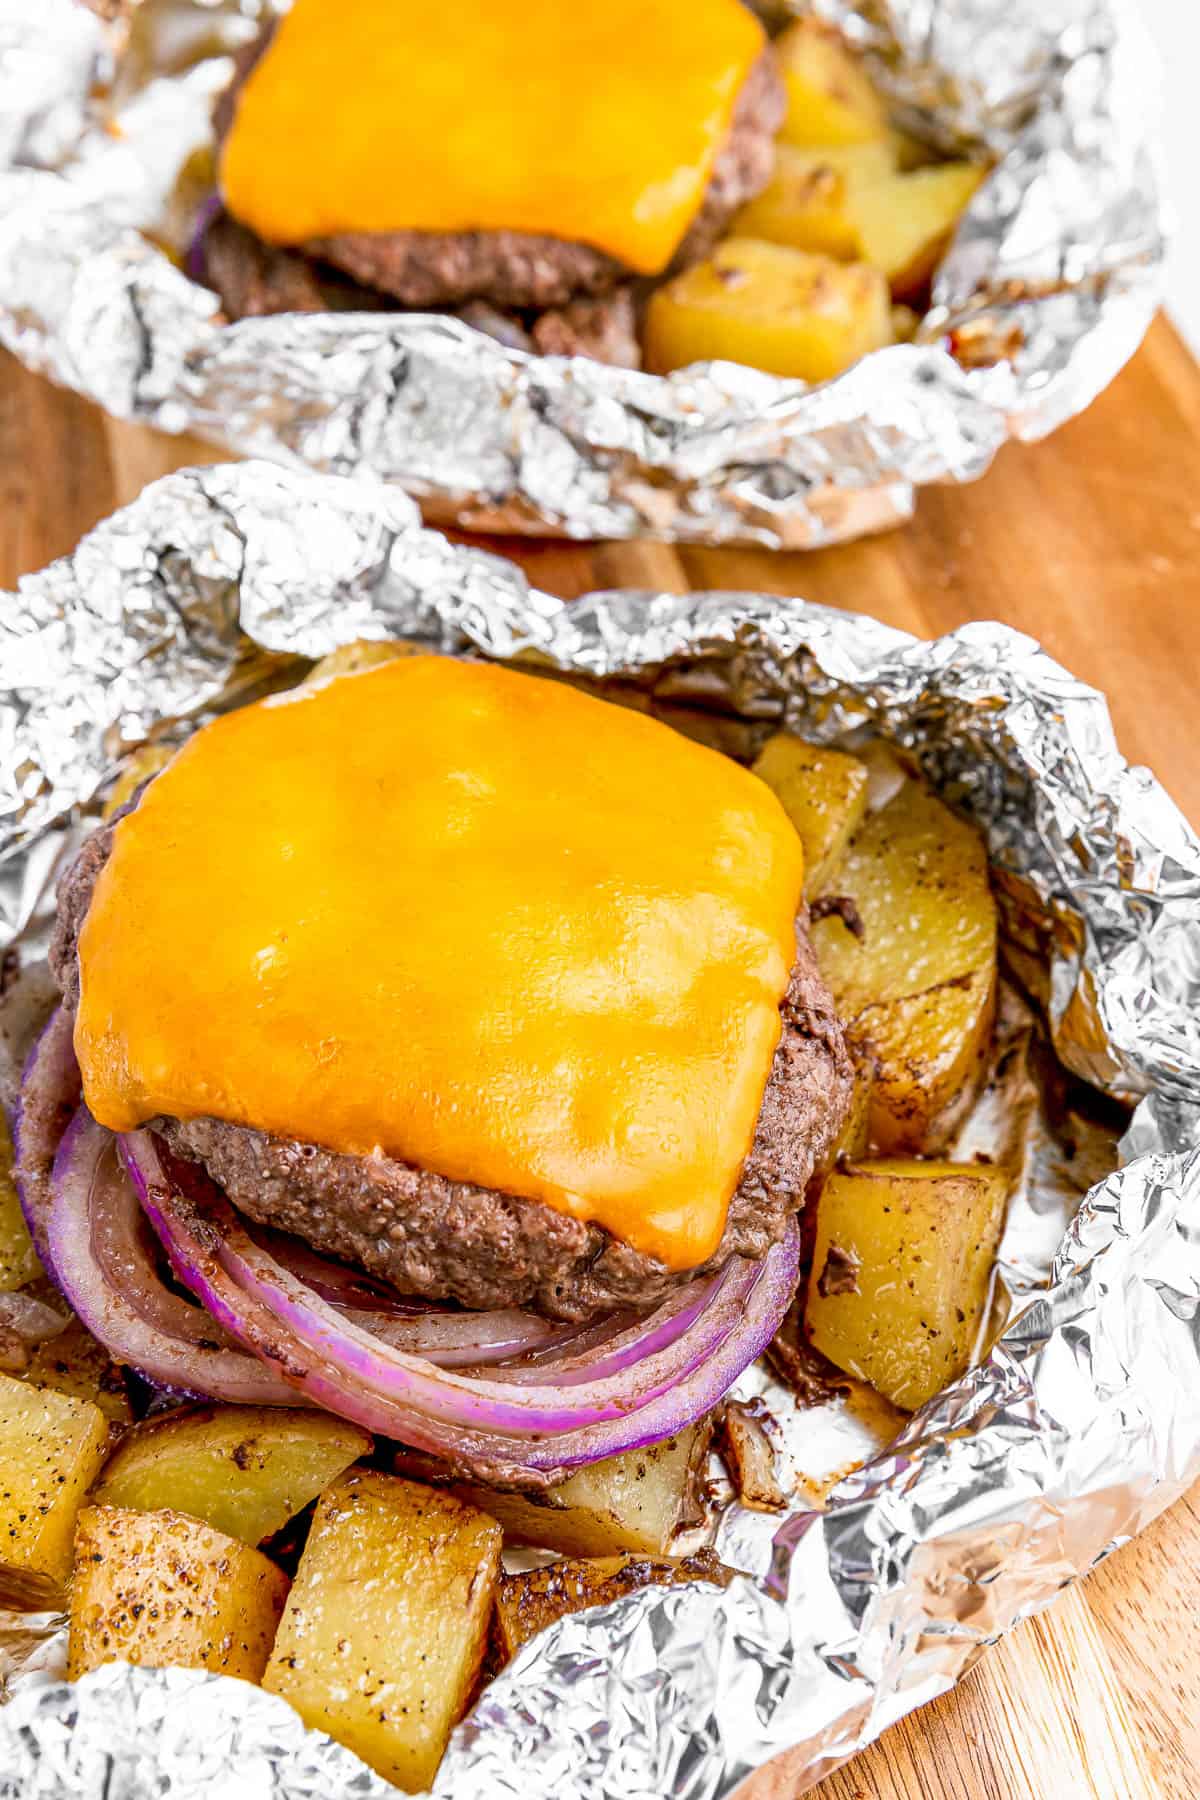 Diced potatoes, burger patty, cheese, and onions arranged on a piece of foil.